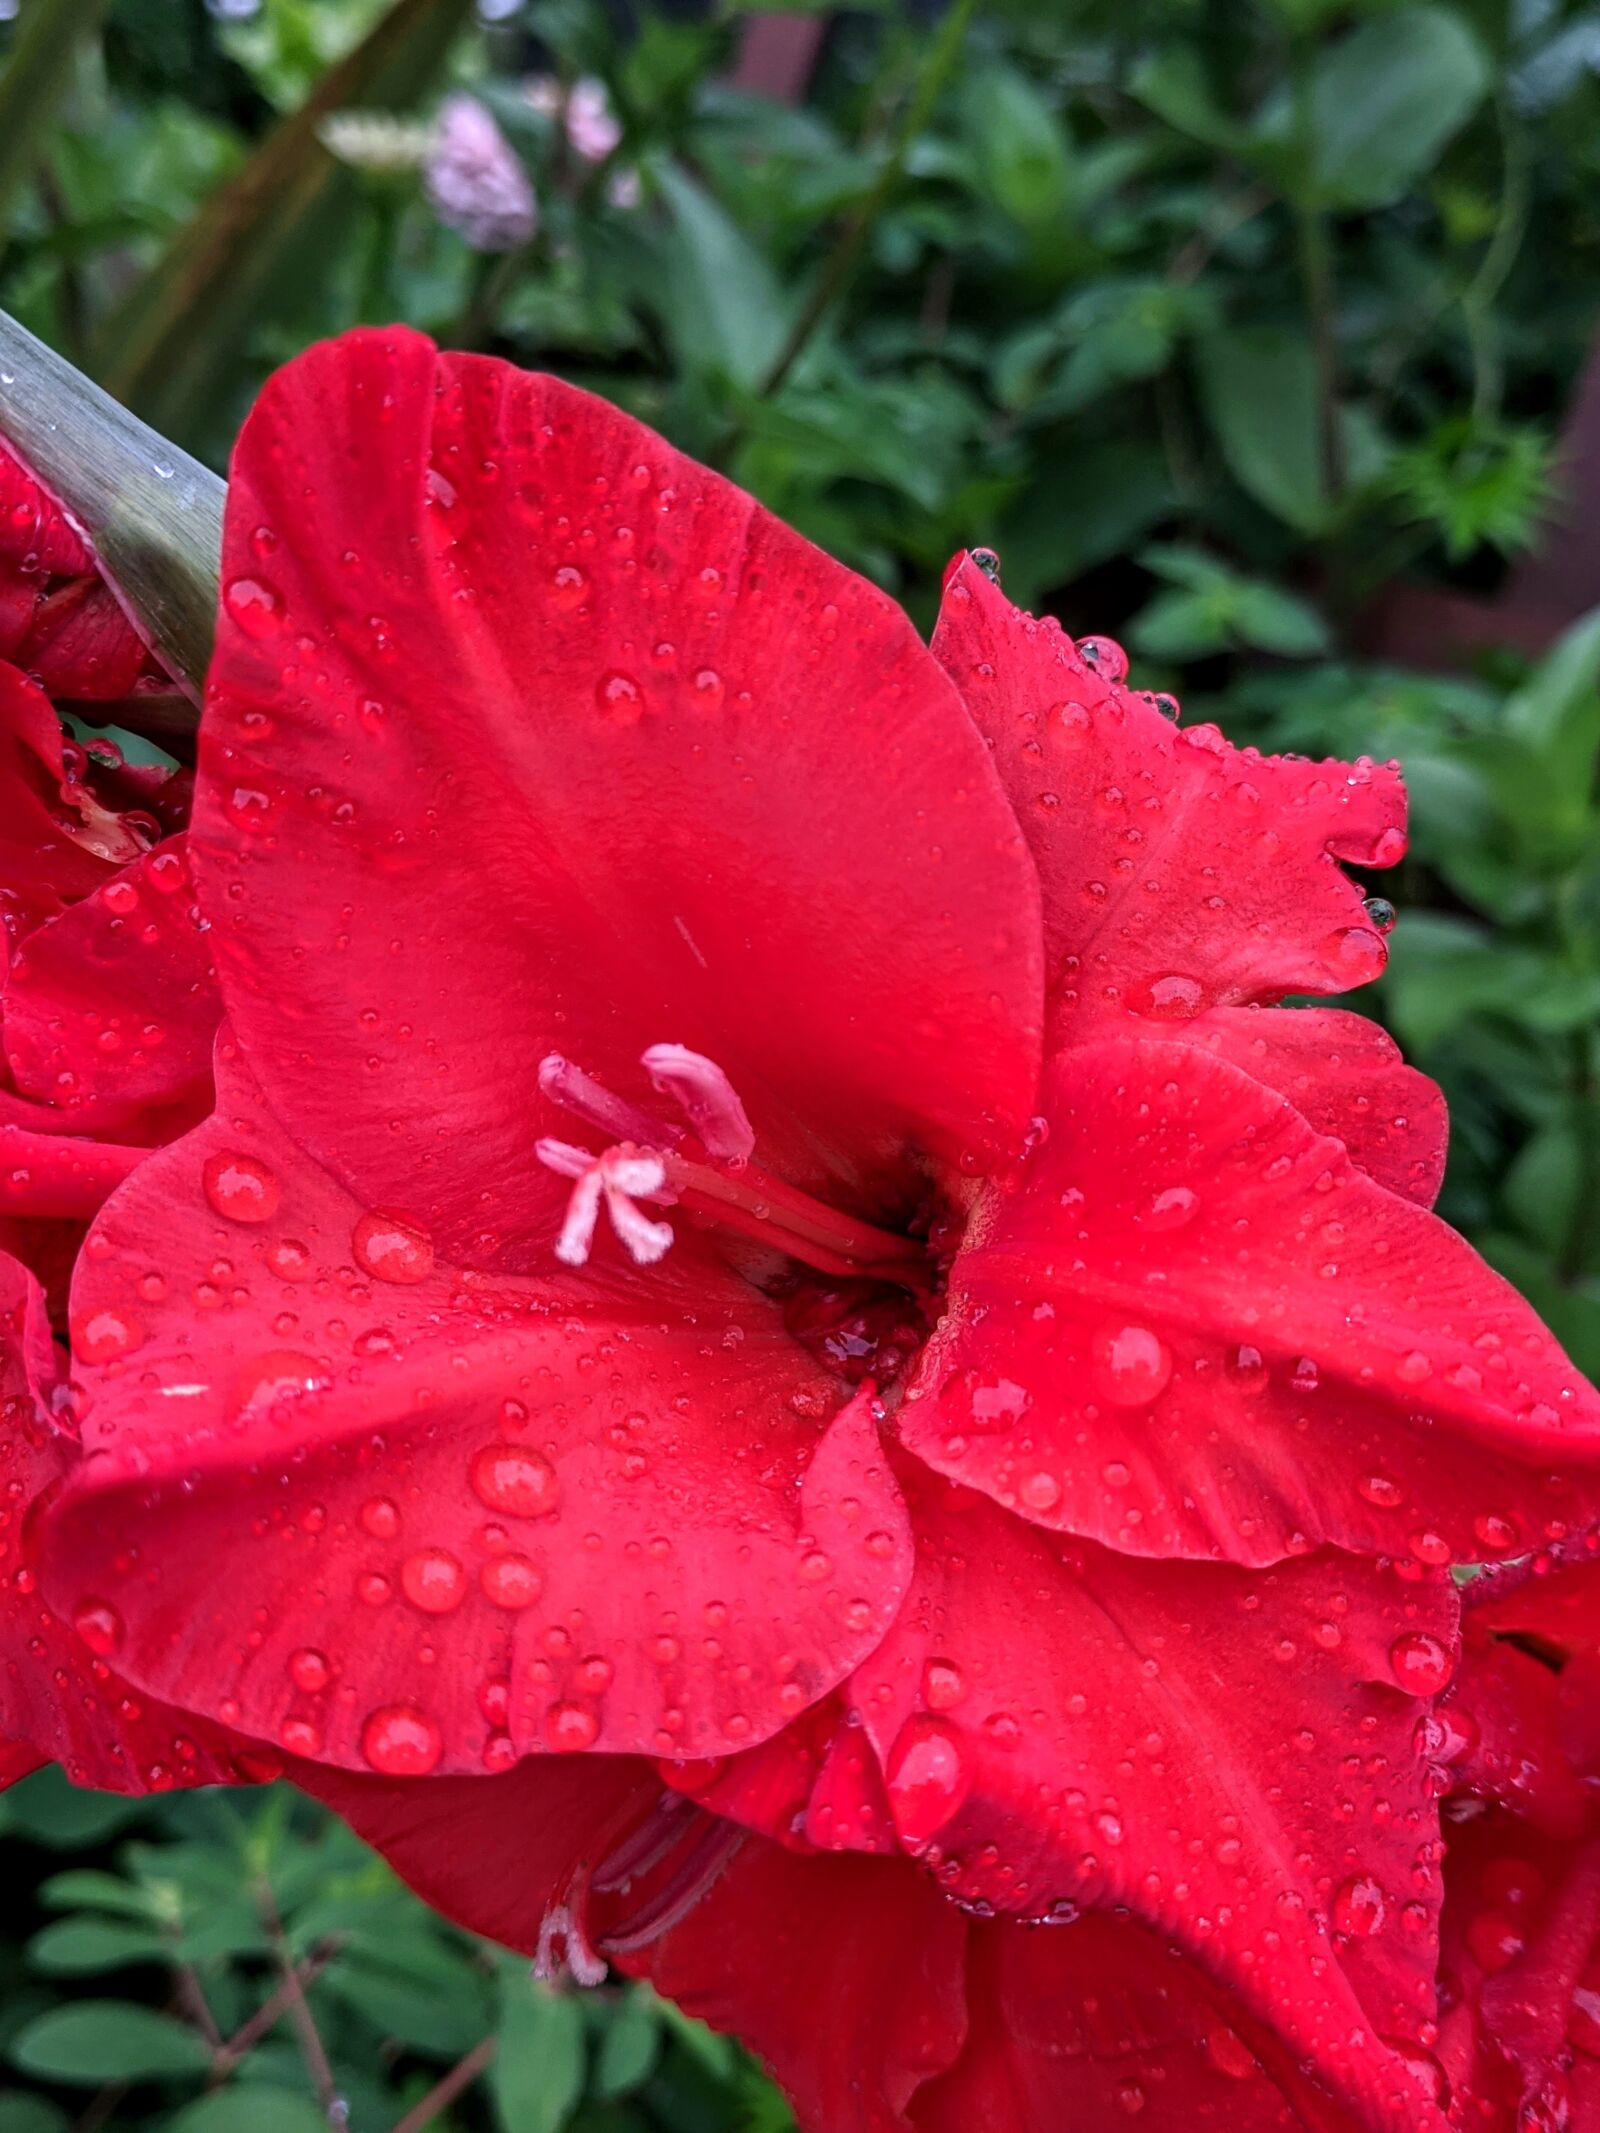 Google Pixel sample photo. Flower, red, droplets photography